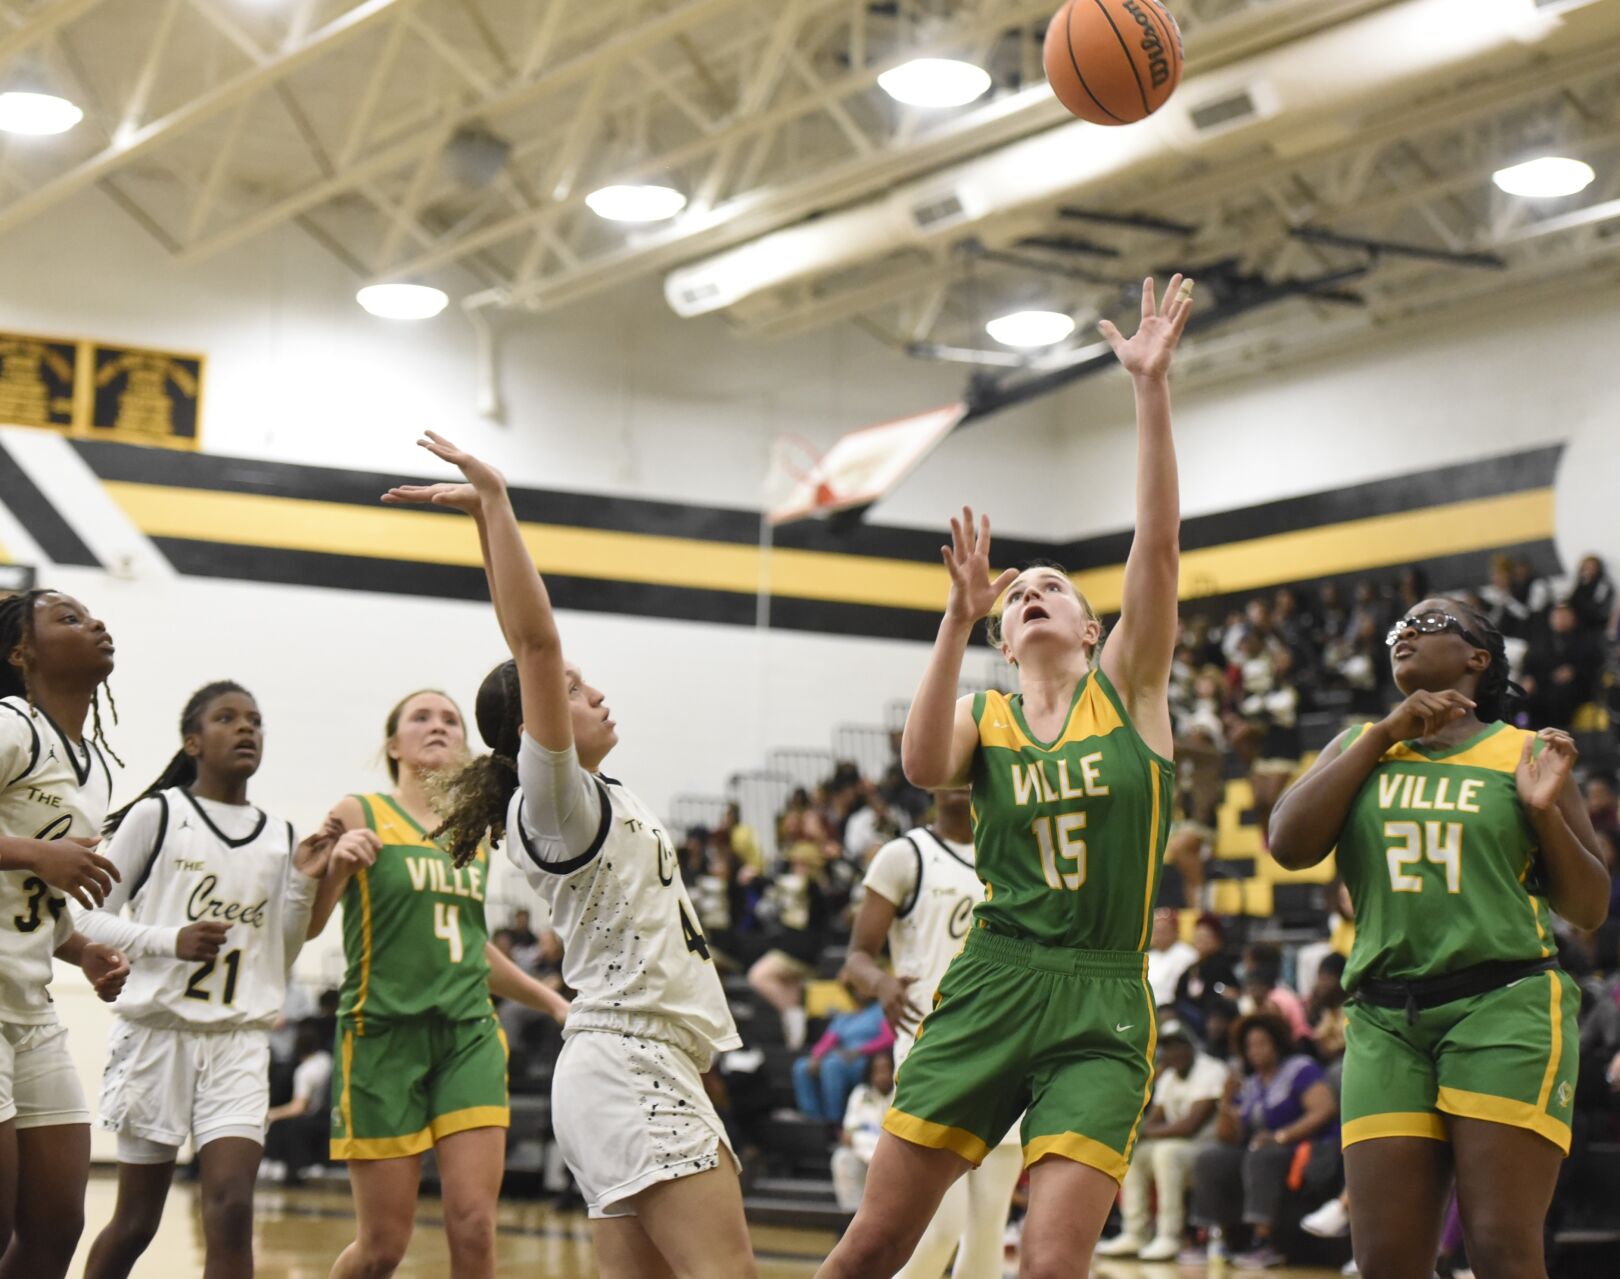 Summerville’s Basketball Teams Face Tough Losses in CHSL and SCISA State Tournaments